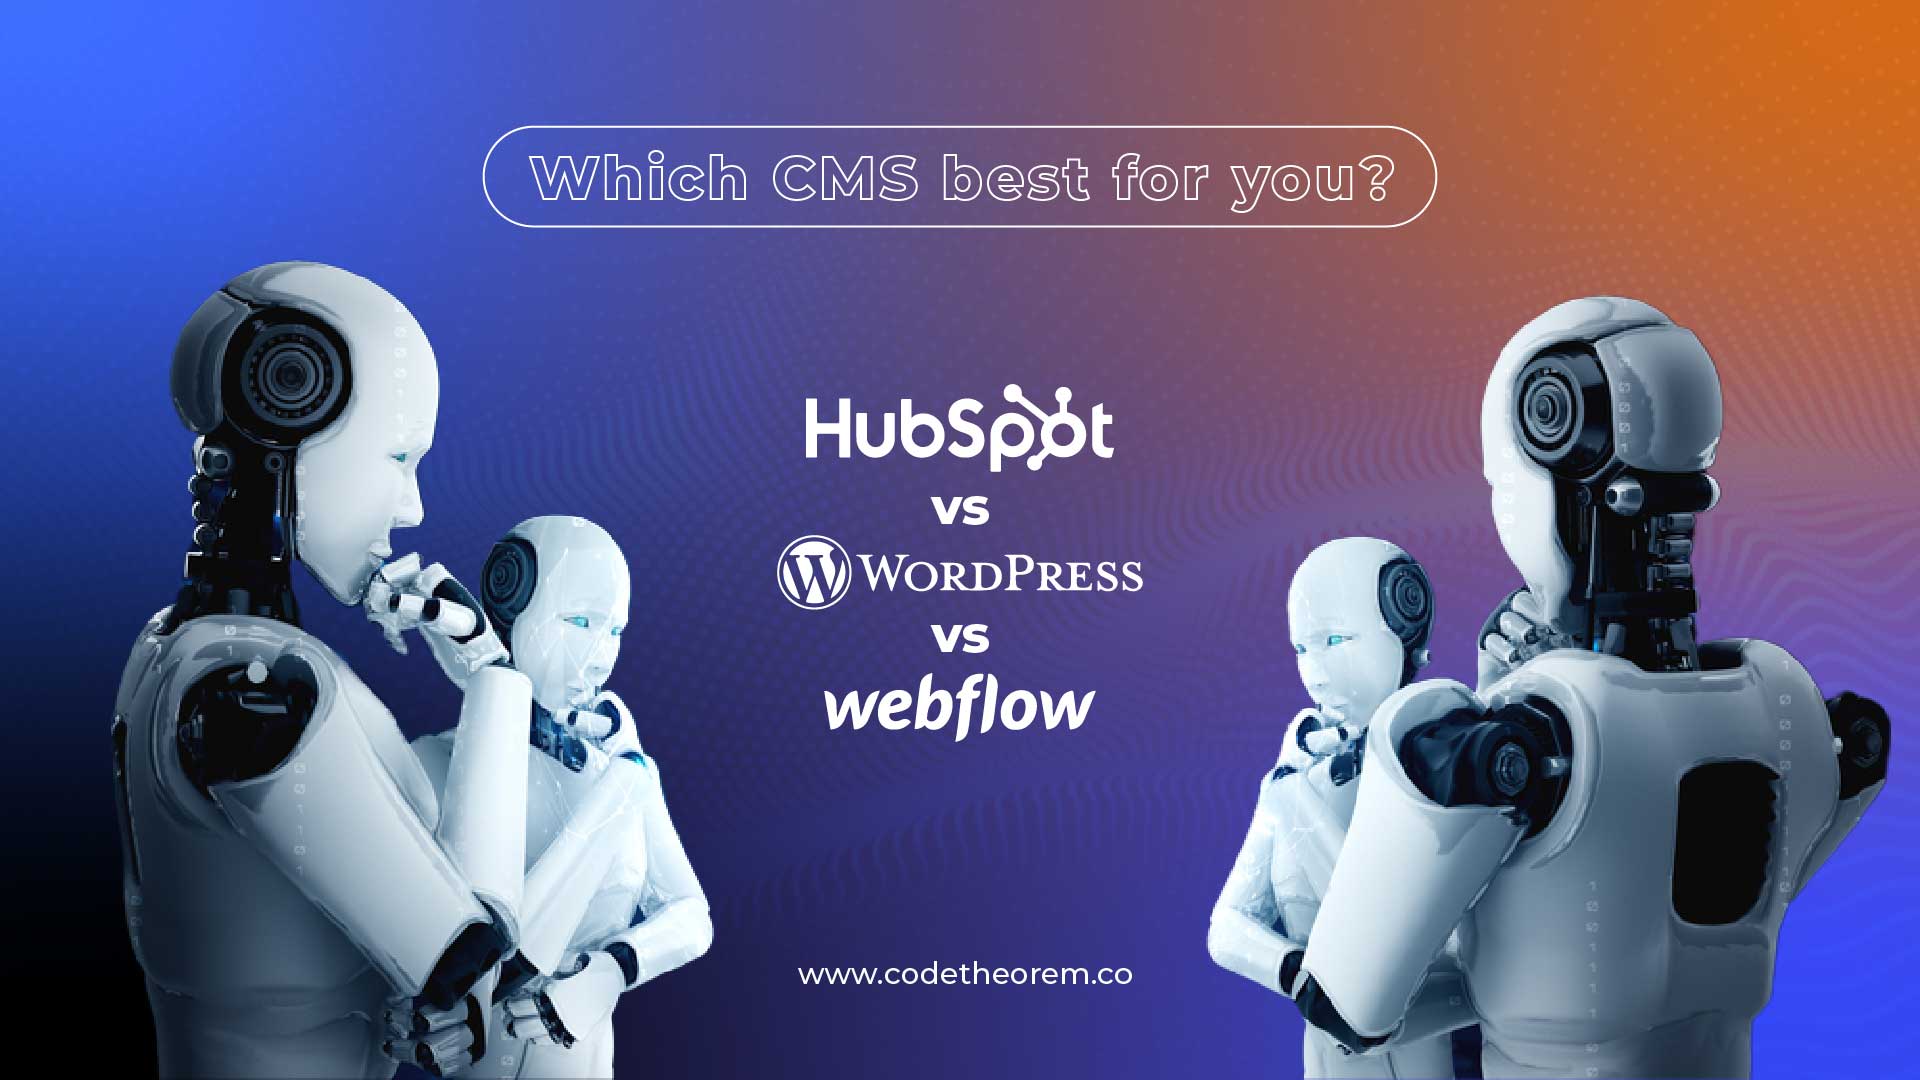 Hubspot Review - Best Crm Platform for Marketing, Sales, And More.